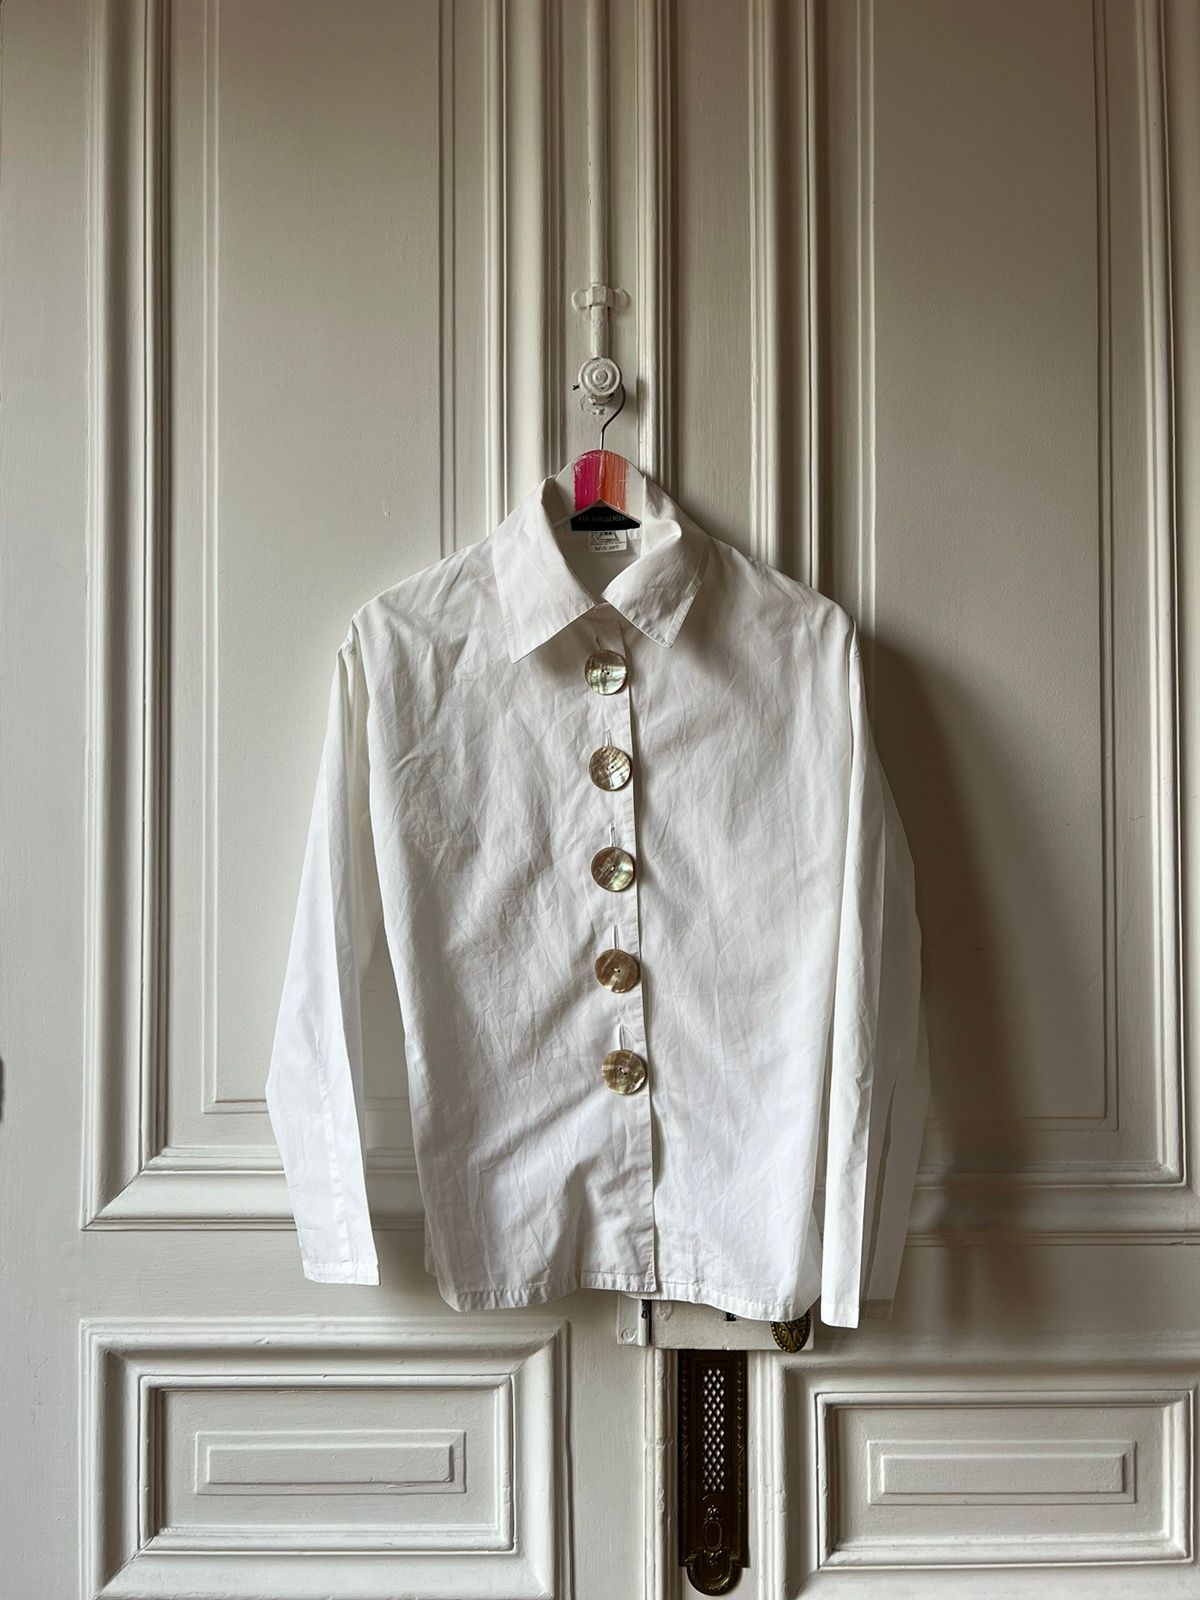 Ann Demeulemeester Pearl Buttoned White Shirt Size US S / EU 44-46 / 1 - 1 Preview